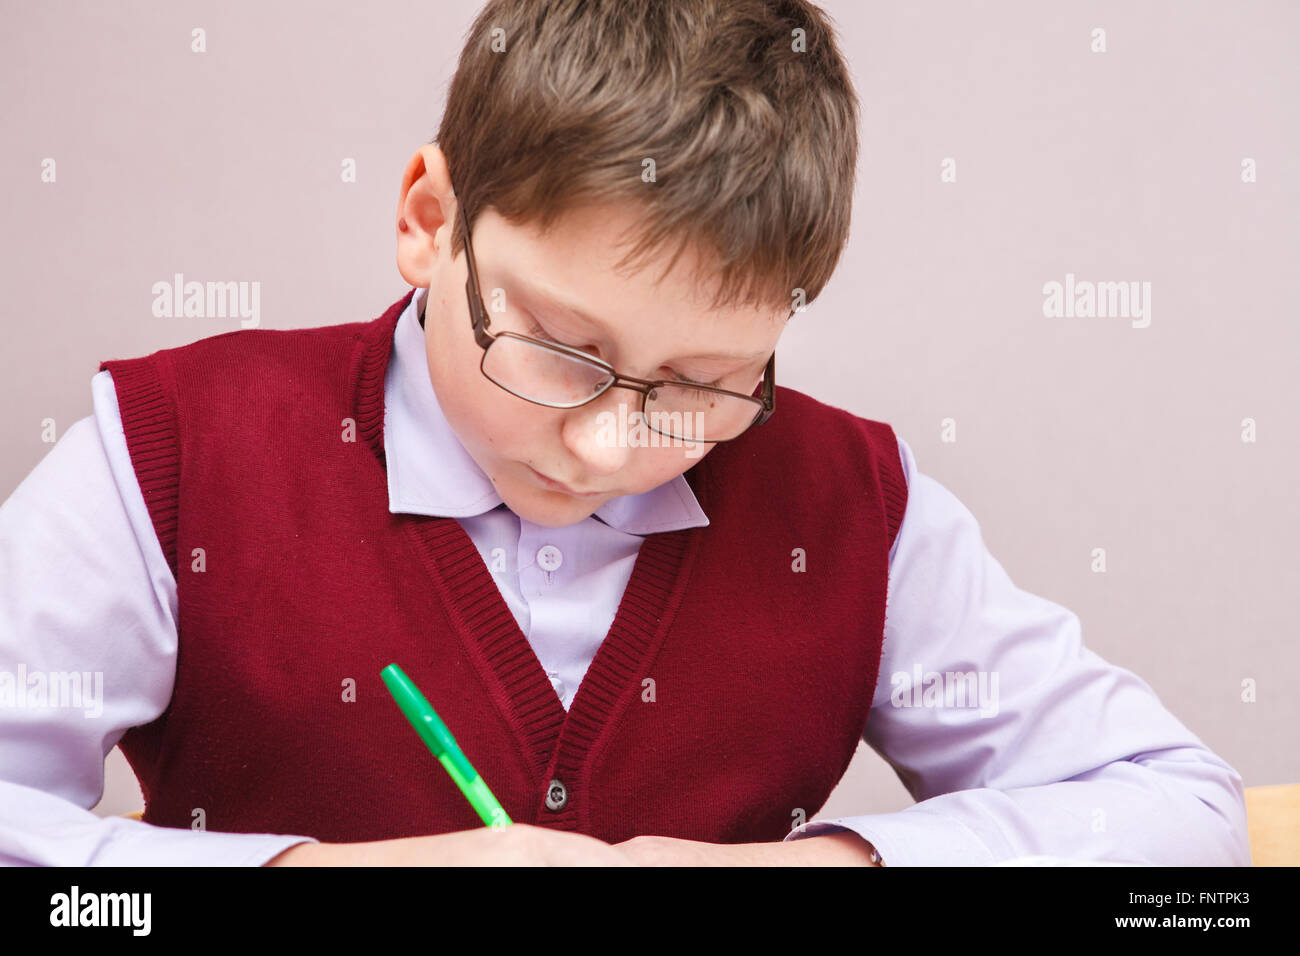 boy with glasses sitting at a desk writing Stock Photo